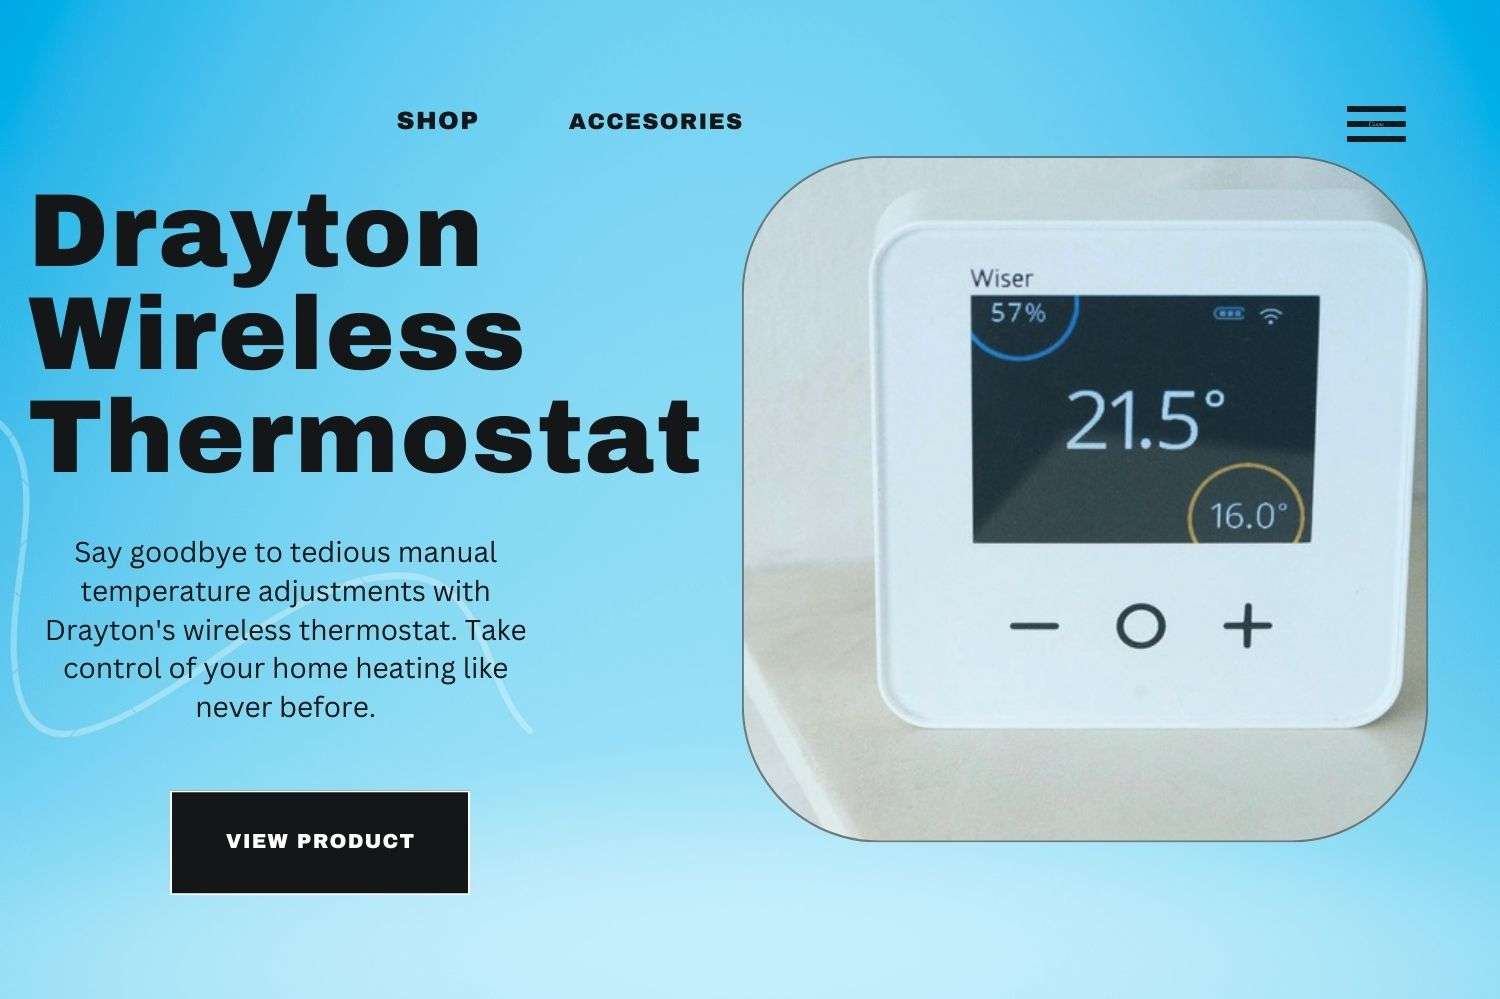 Drayton wireless thermostat controlling home heating system efficiently.